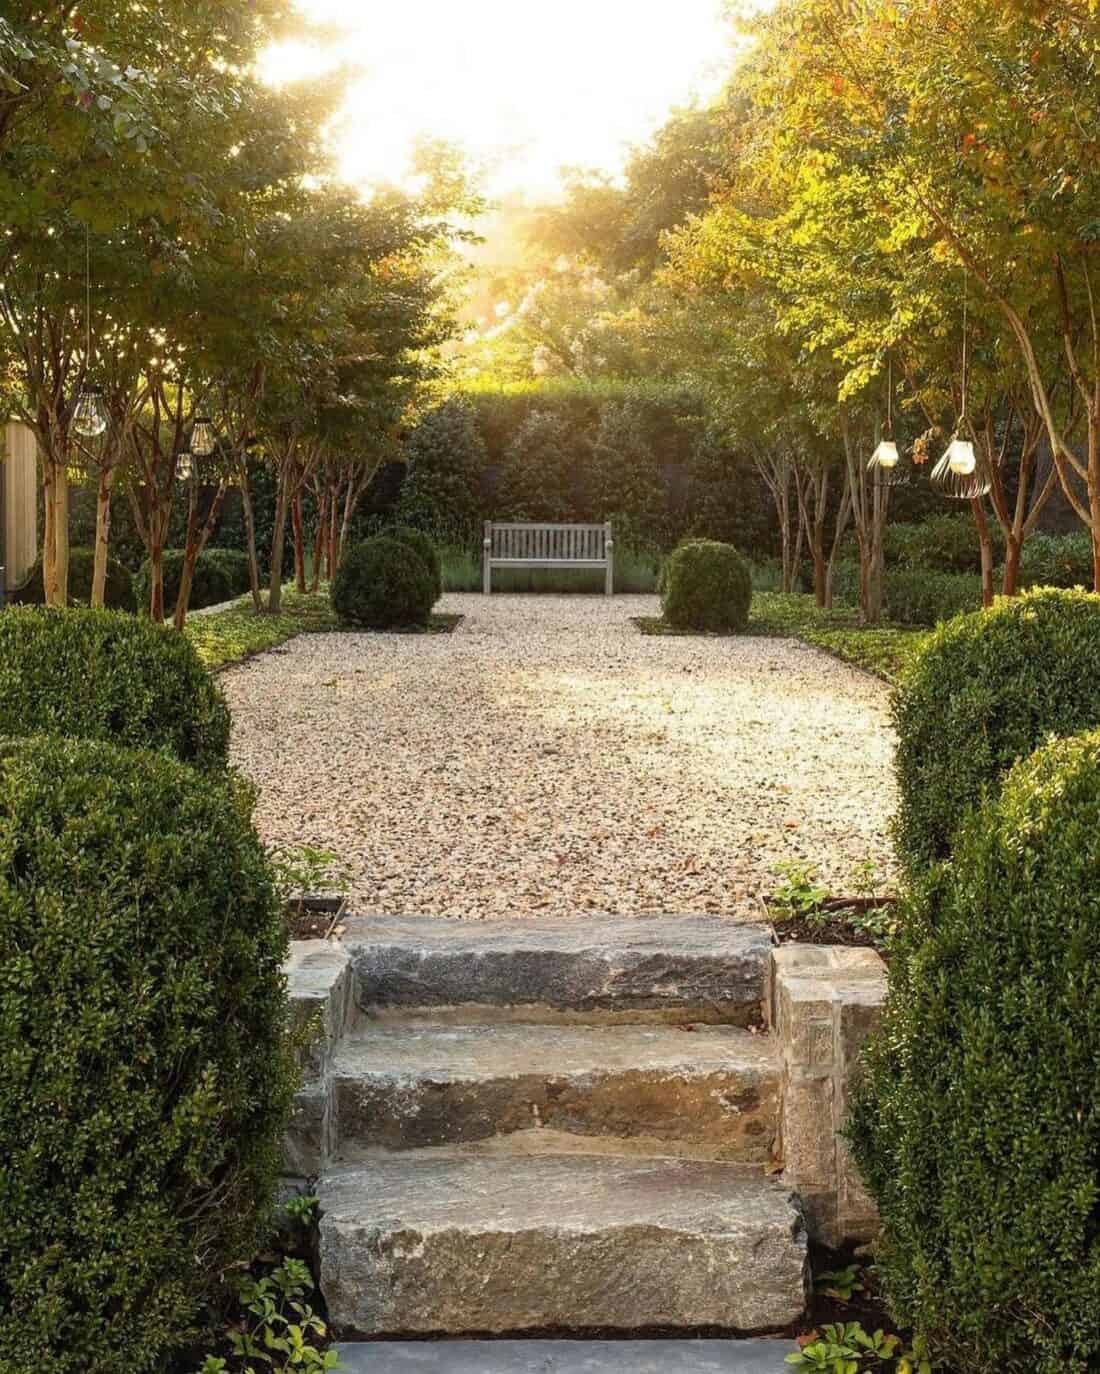 A serene garden scene with a gravel pathway leading to a wooden bench bathed in sunlight. Stone steps in the foreground are bordered by neatly trimmed hedges and trees adorned with hanging lanterns, perfect for transforming into a backyard yoga space. Lush greenery surrounds the area, creating a peaceful ambiance.